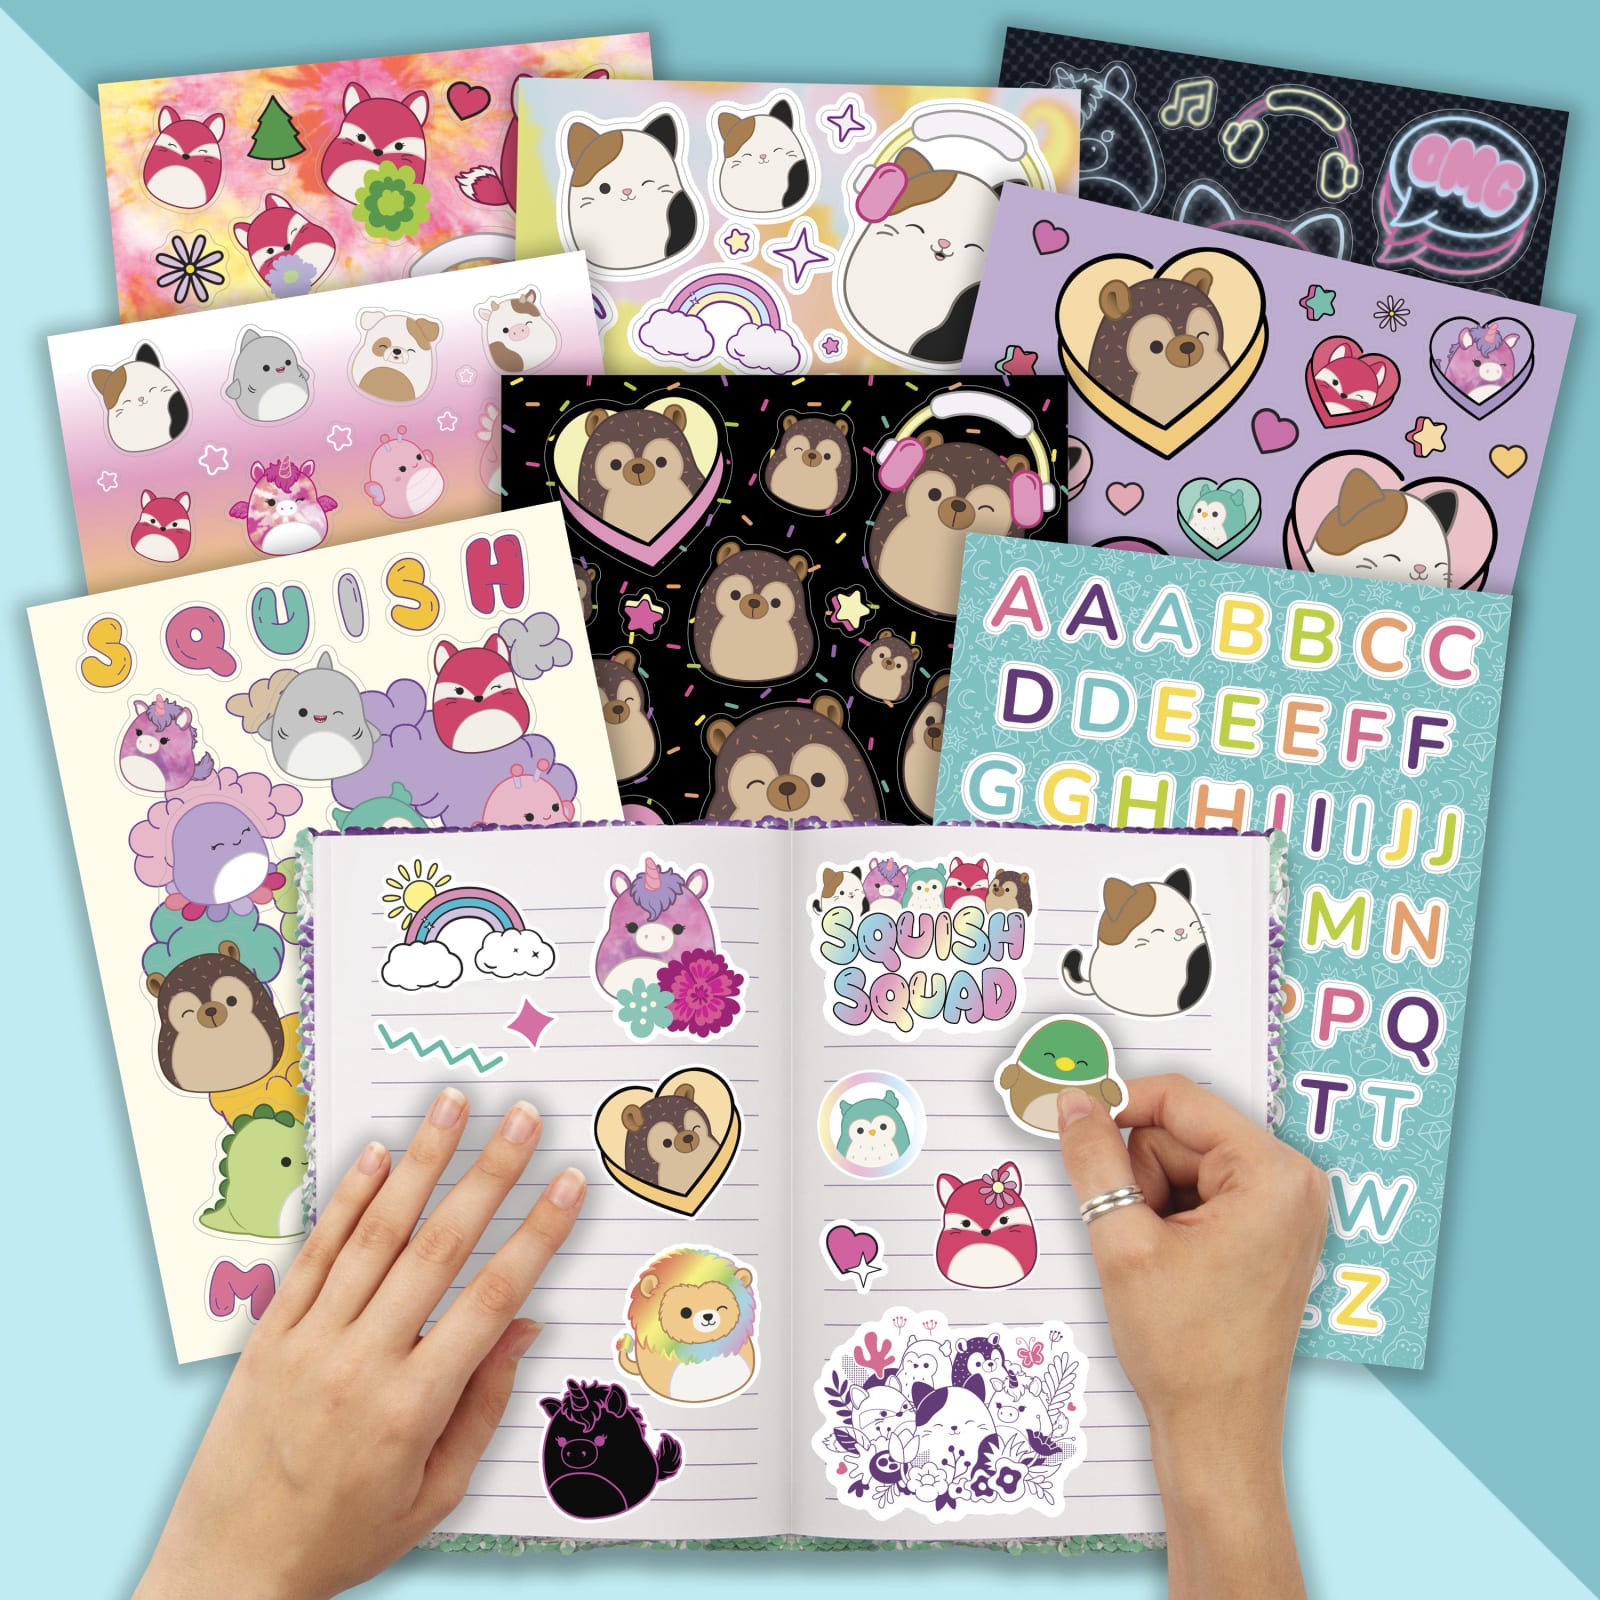 Fashion Angels Squishmallows Vinyl Sticker Pack - Includes 100 Large  Squishmallows Stickers - Water Resistant Stickers - Join The Squish Squad -  Accessorize Notebooks, Journals & More - Multi (50433) : Toys & Games 